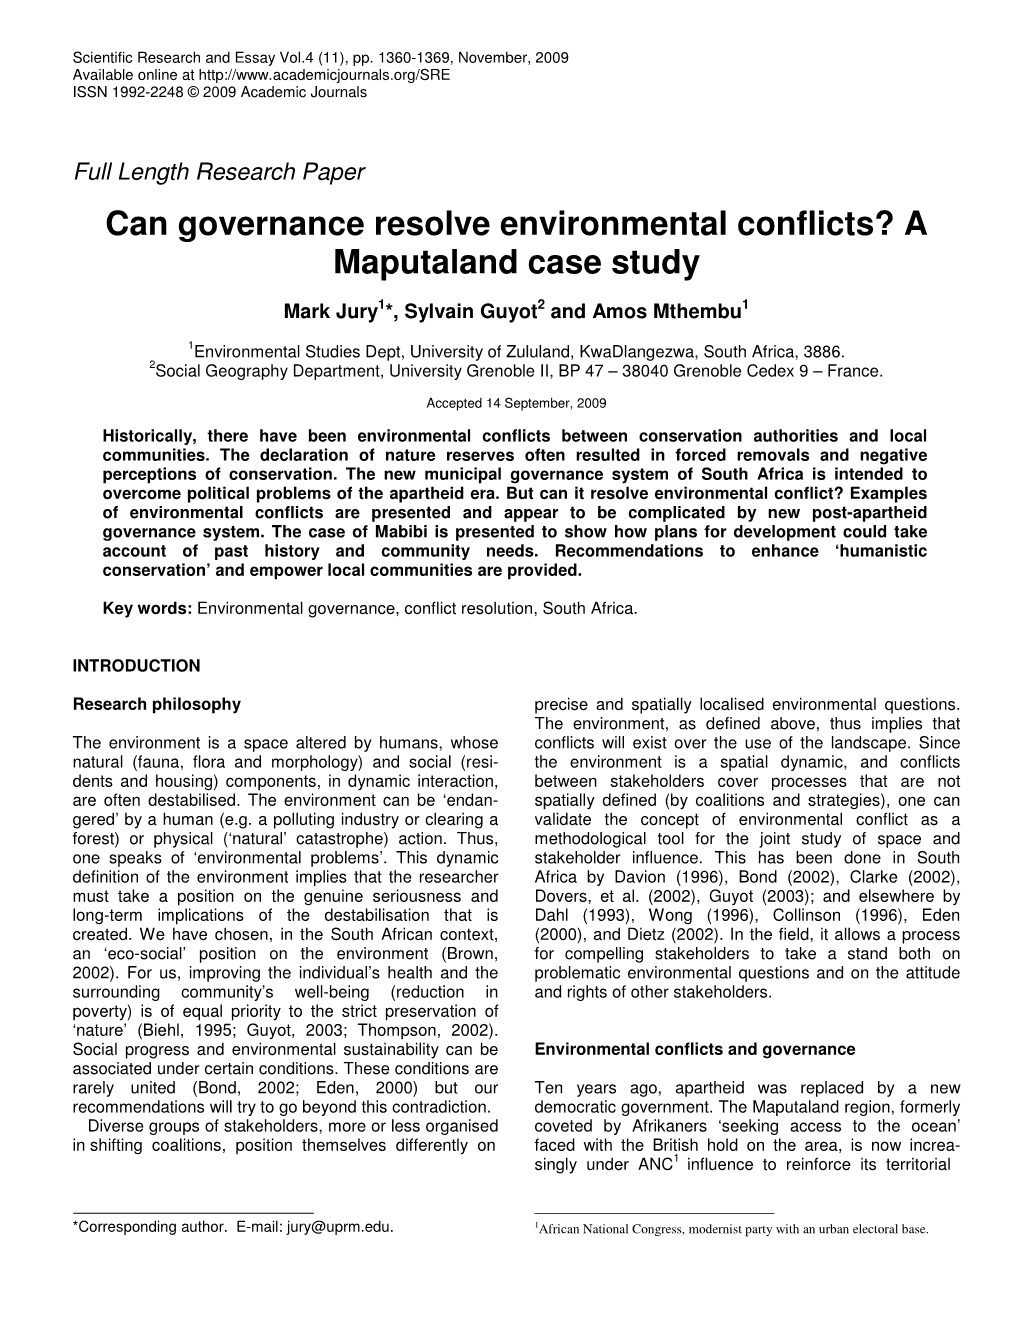 Can Governance Resolve Environmental Conflicts? a Maputaland Case Study